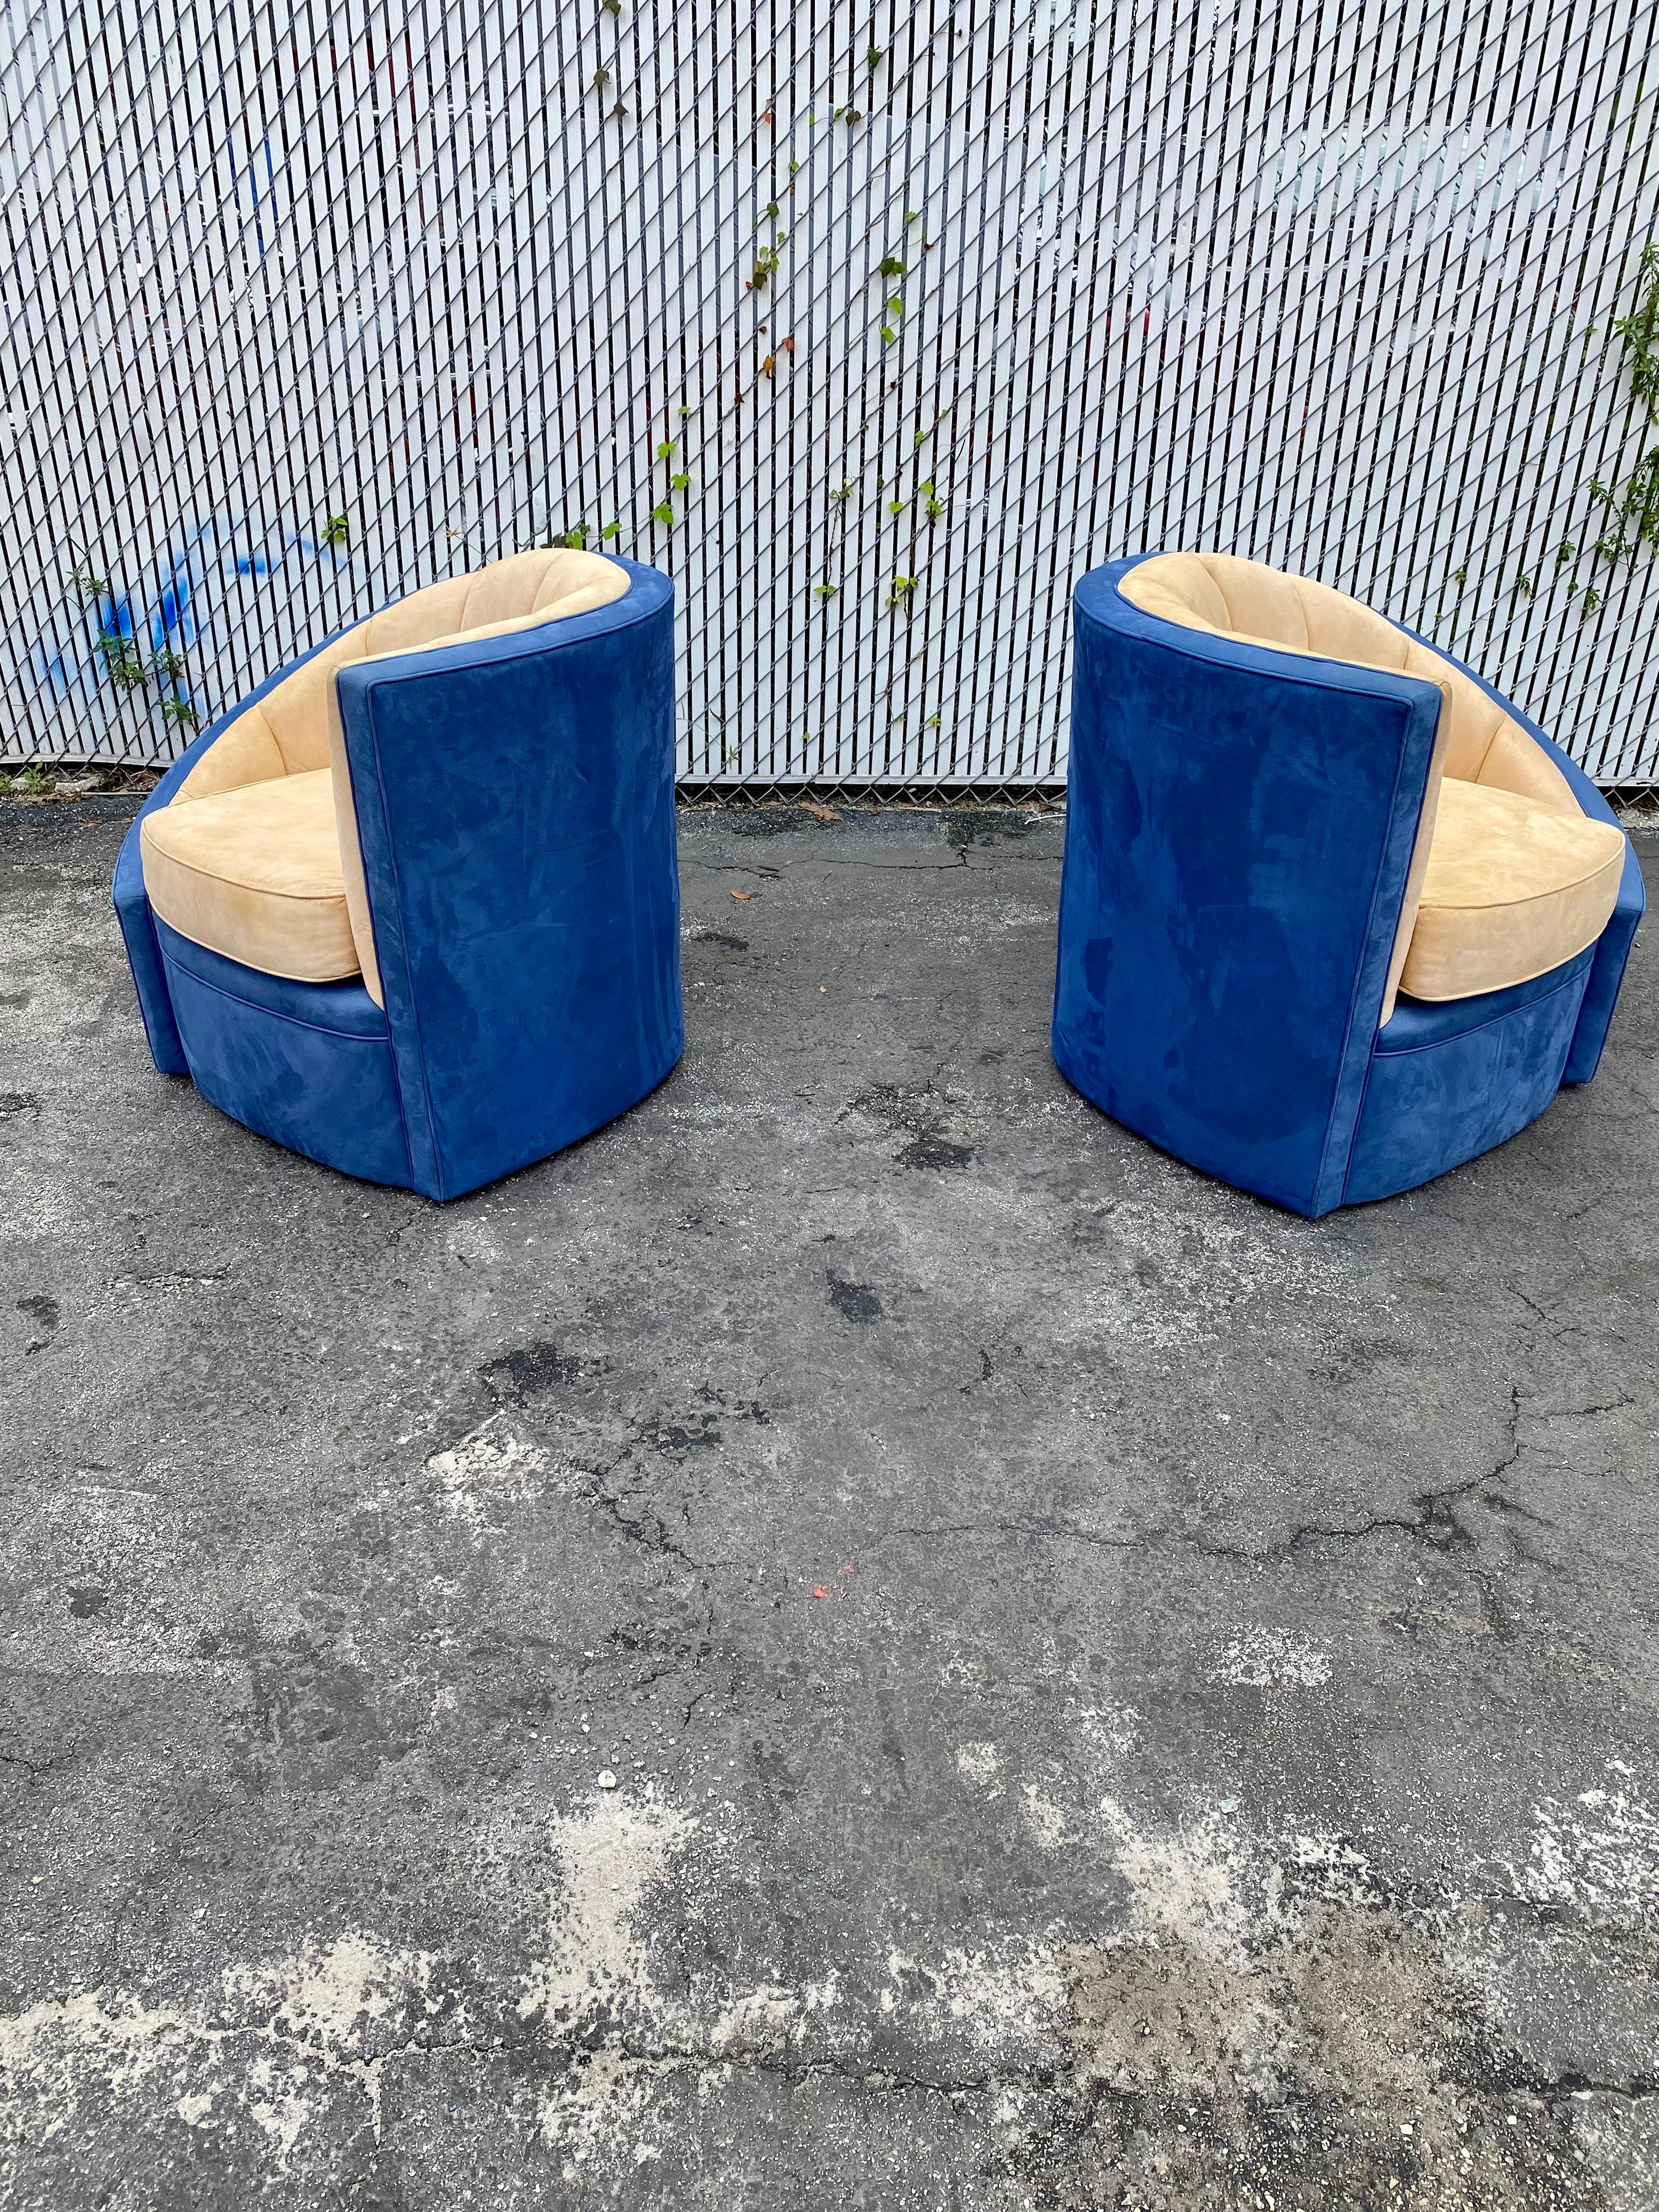 1990s Weiman Asymmetrical Channeled Barrel Chairs, Set of 2 For Sale 3